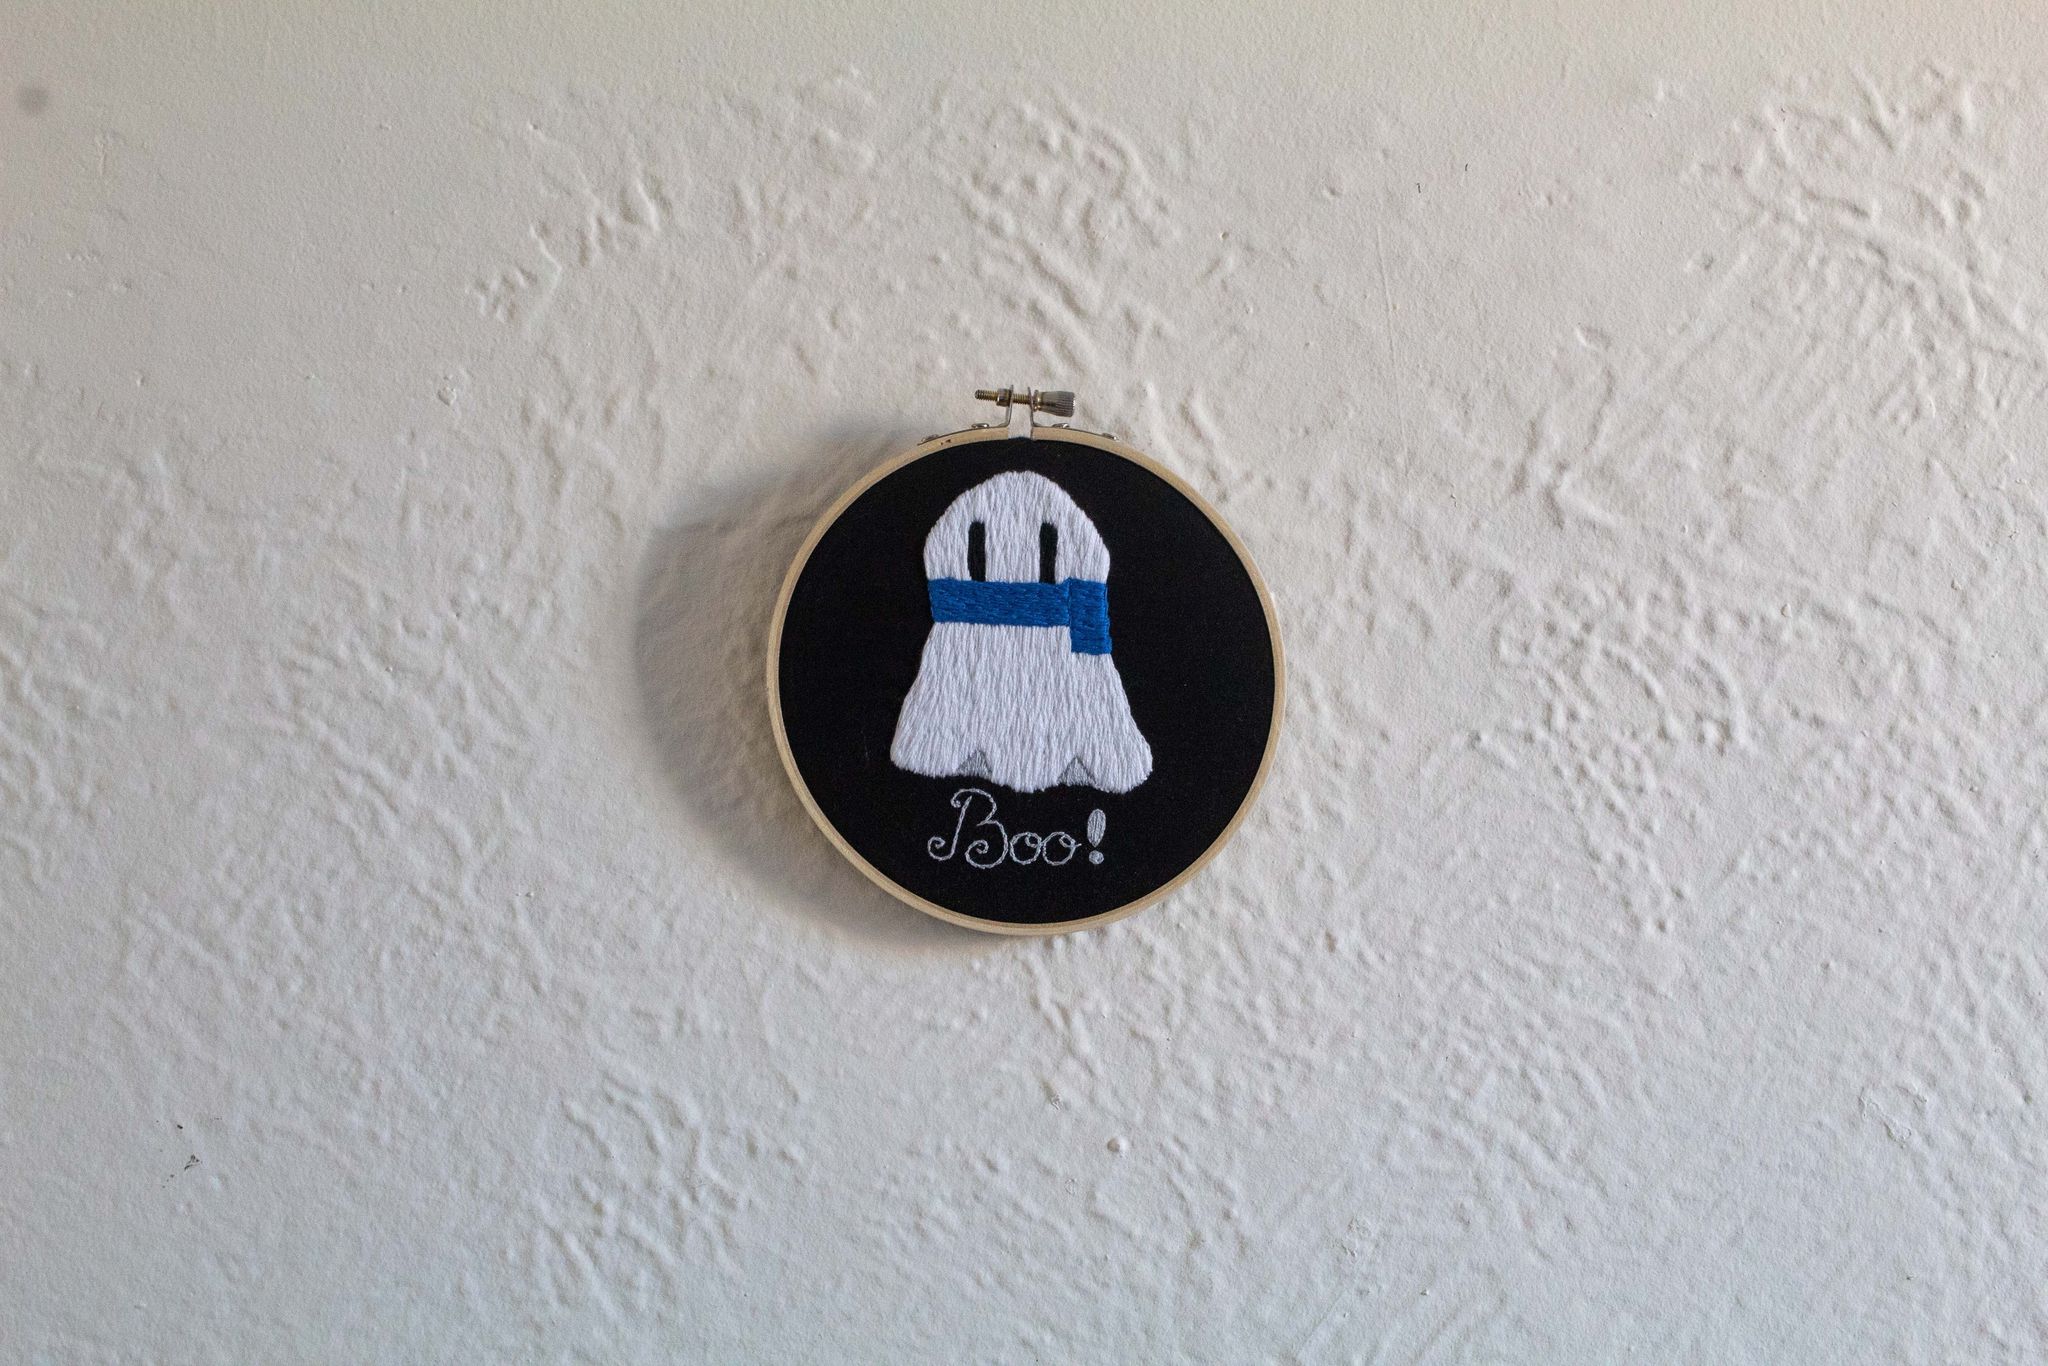 Product image of white embroidered ghost wearing a blue scarf on a black background with text "Boo!", hung up on a white wall